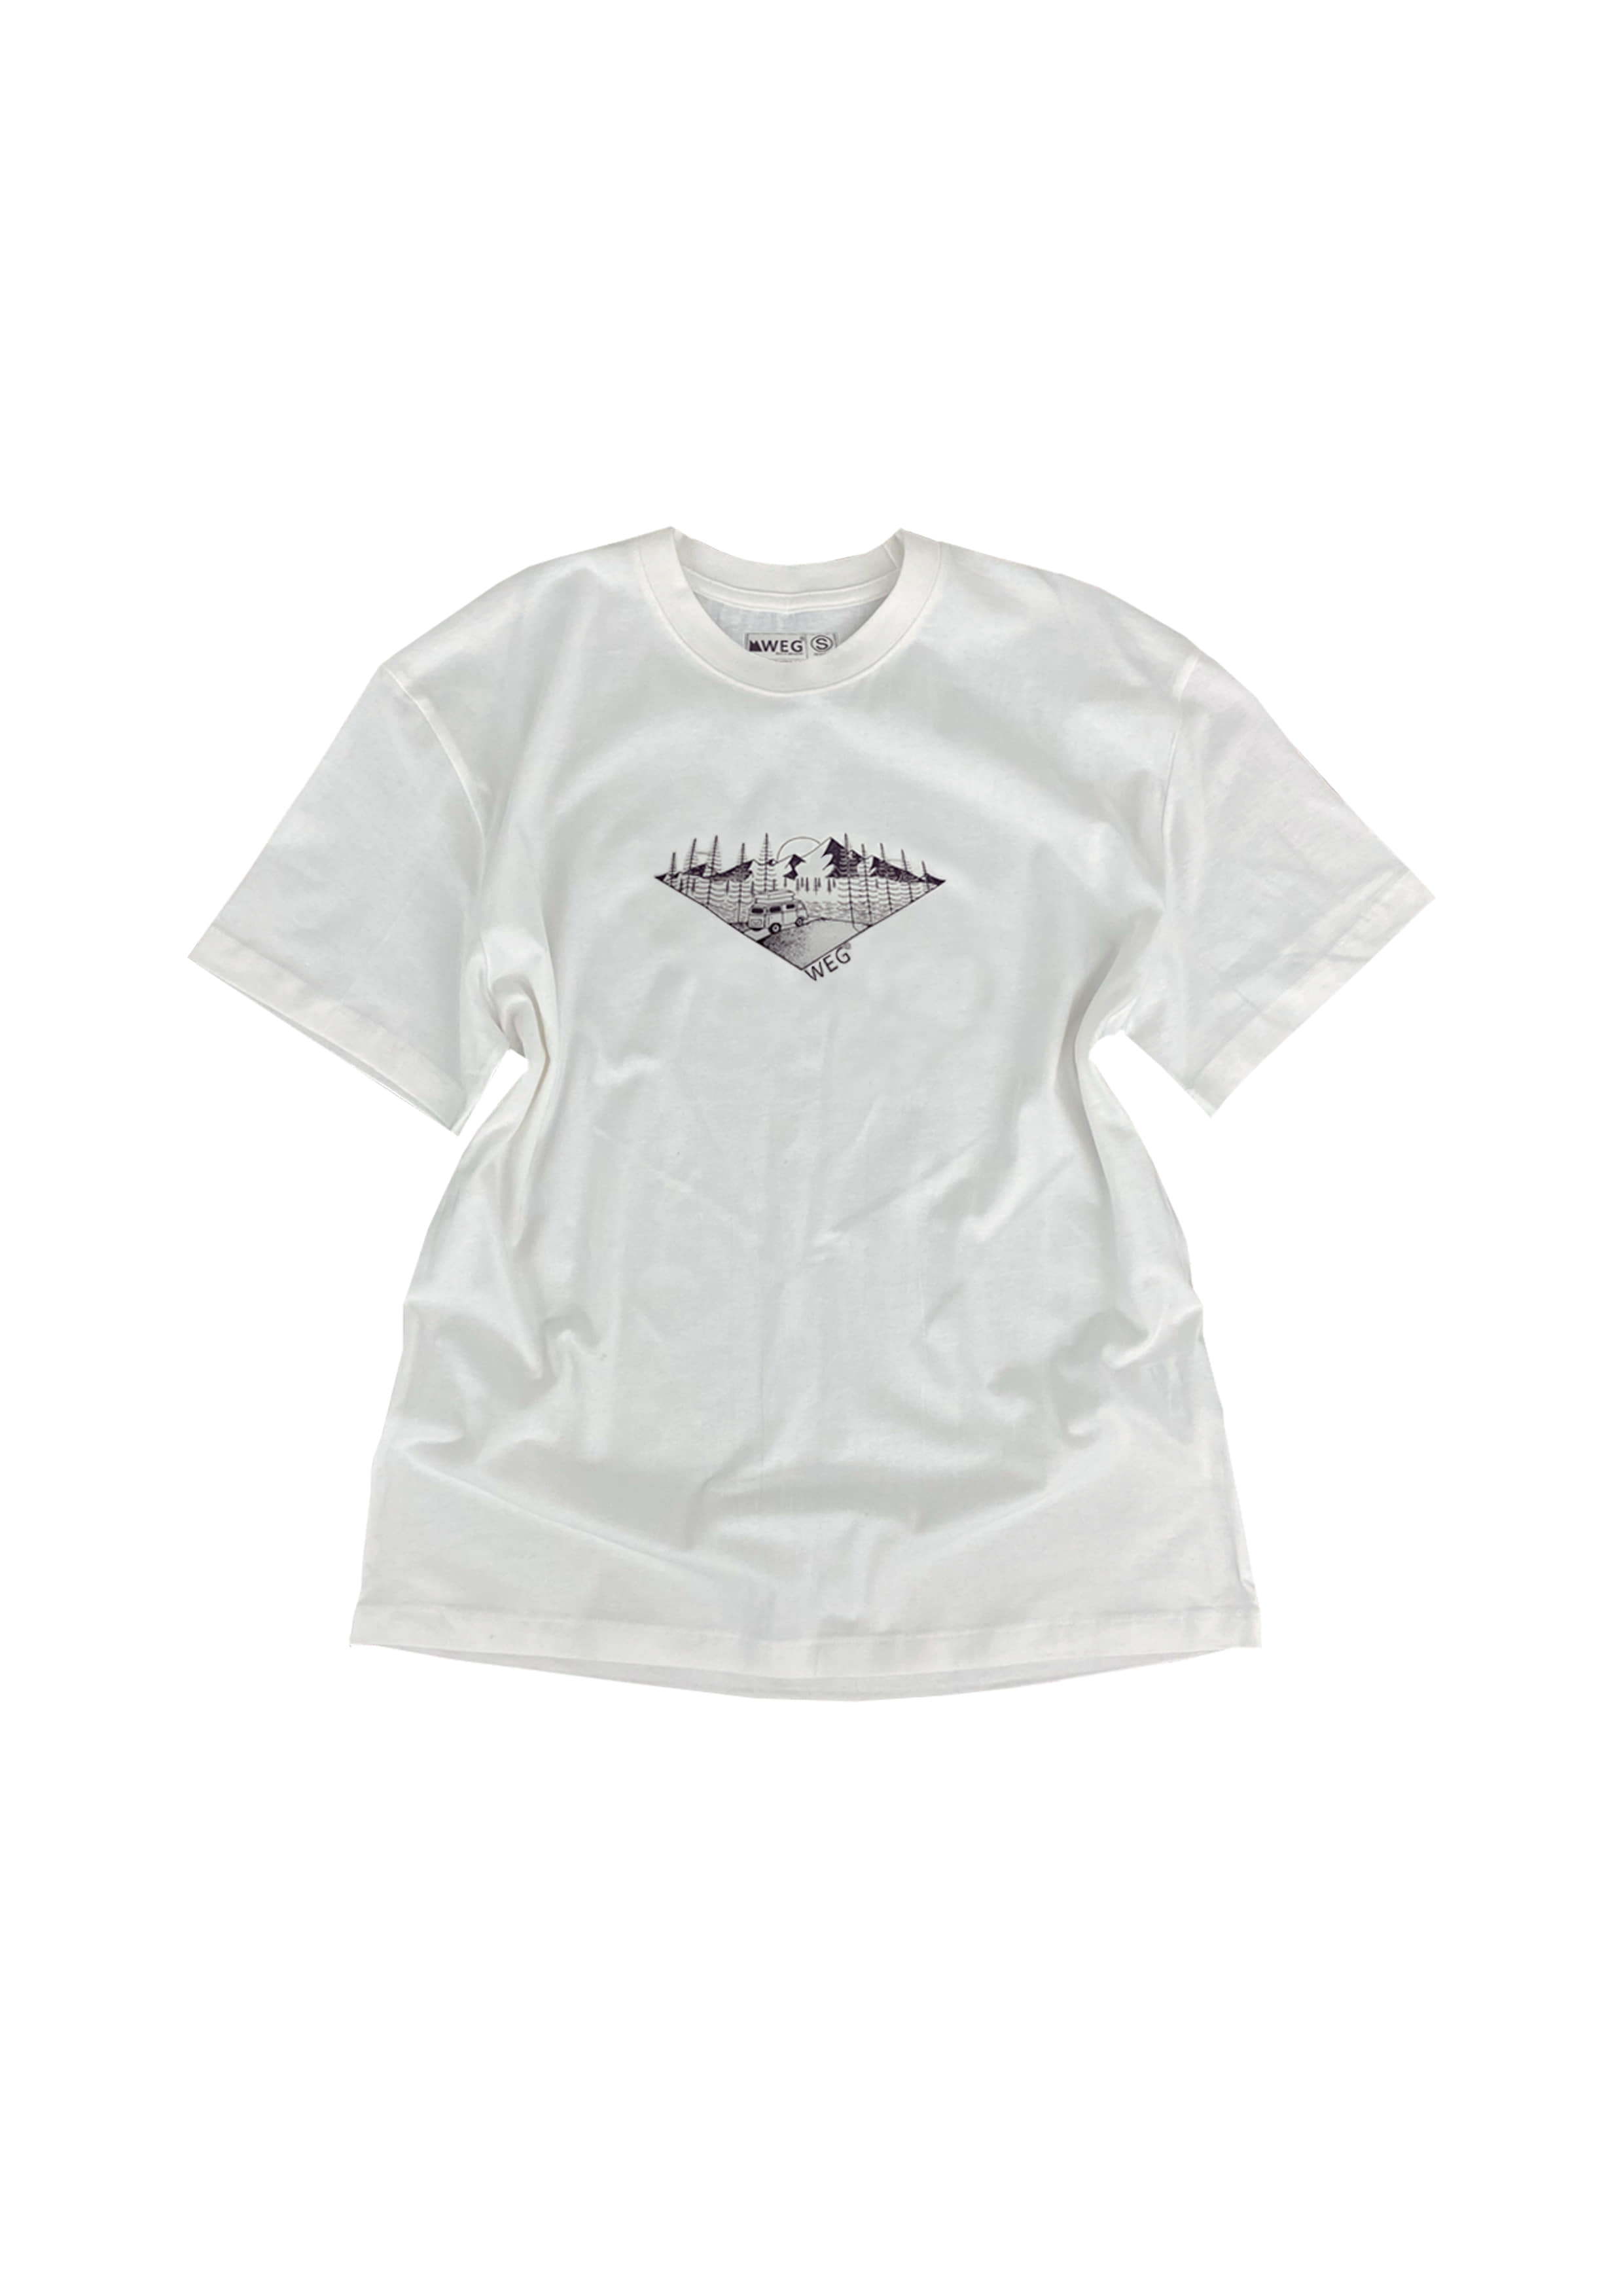 Road To The Mountain 1/2 T-Shirt (Burgundy)